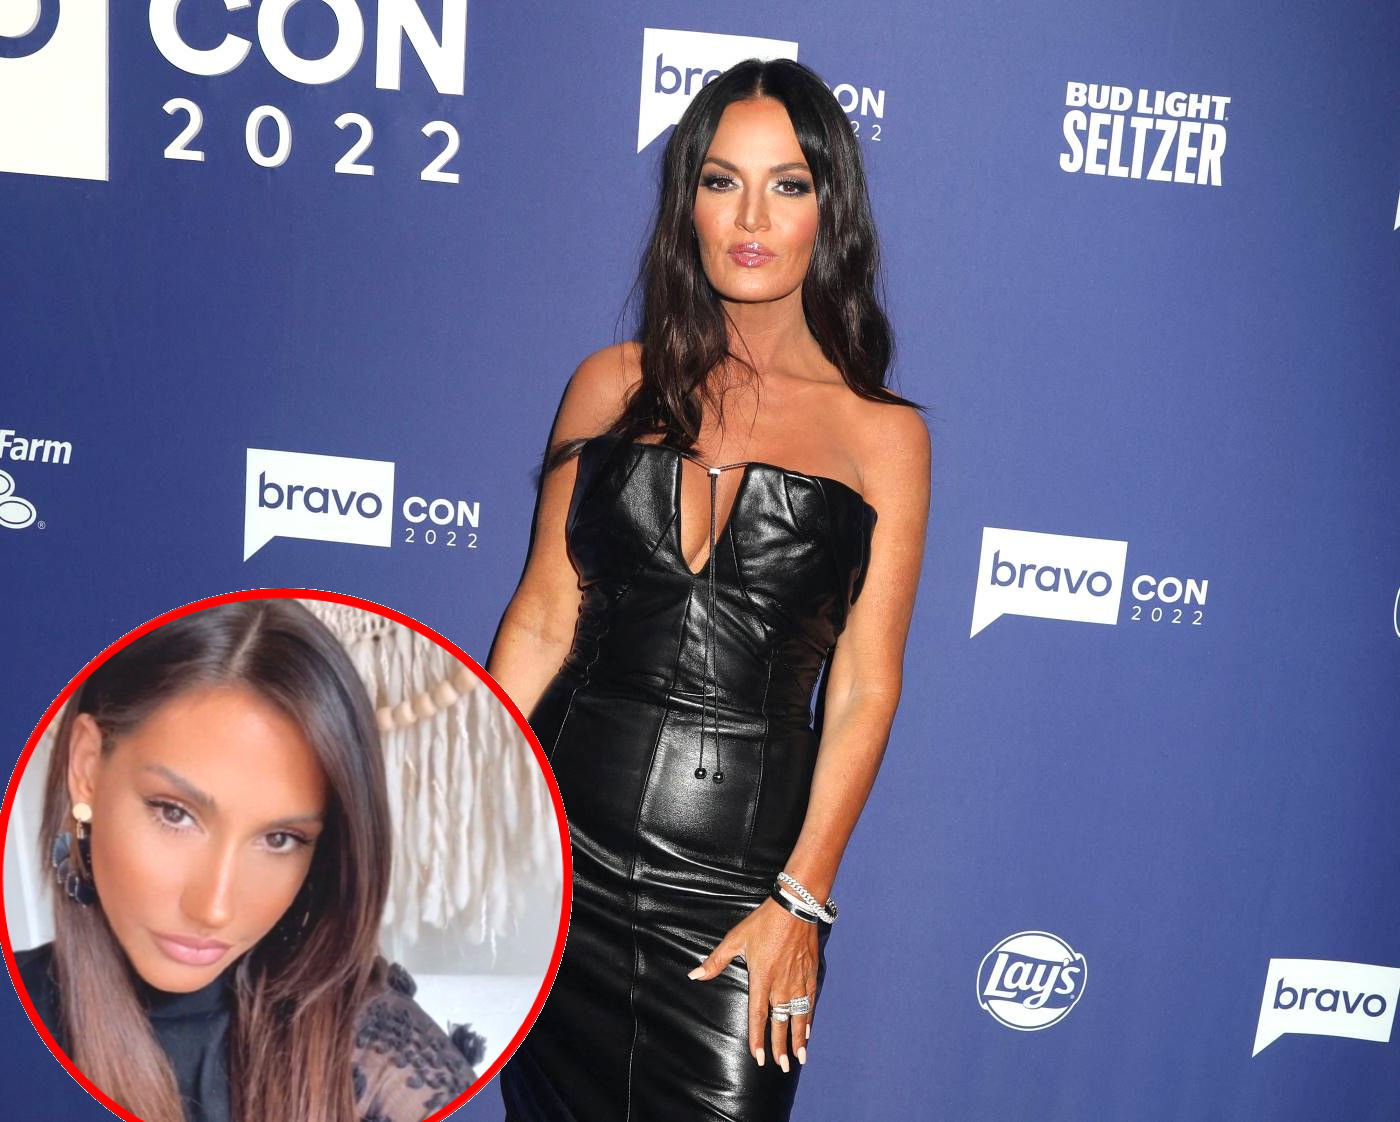 Lisa Barlow Crops Out Newbie Monica Garcia from Cast Photo on Instagram, as Video Surfaces of Costars in Heated Argument amid Filming